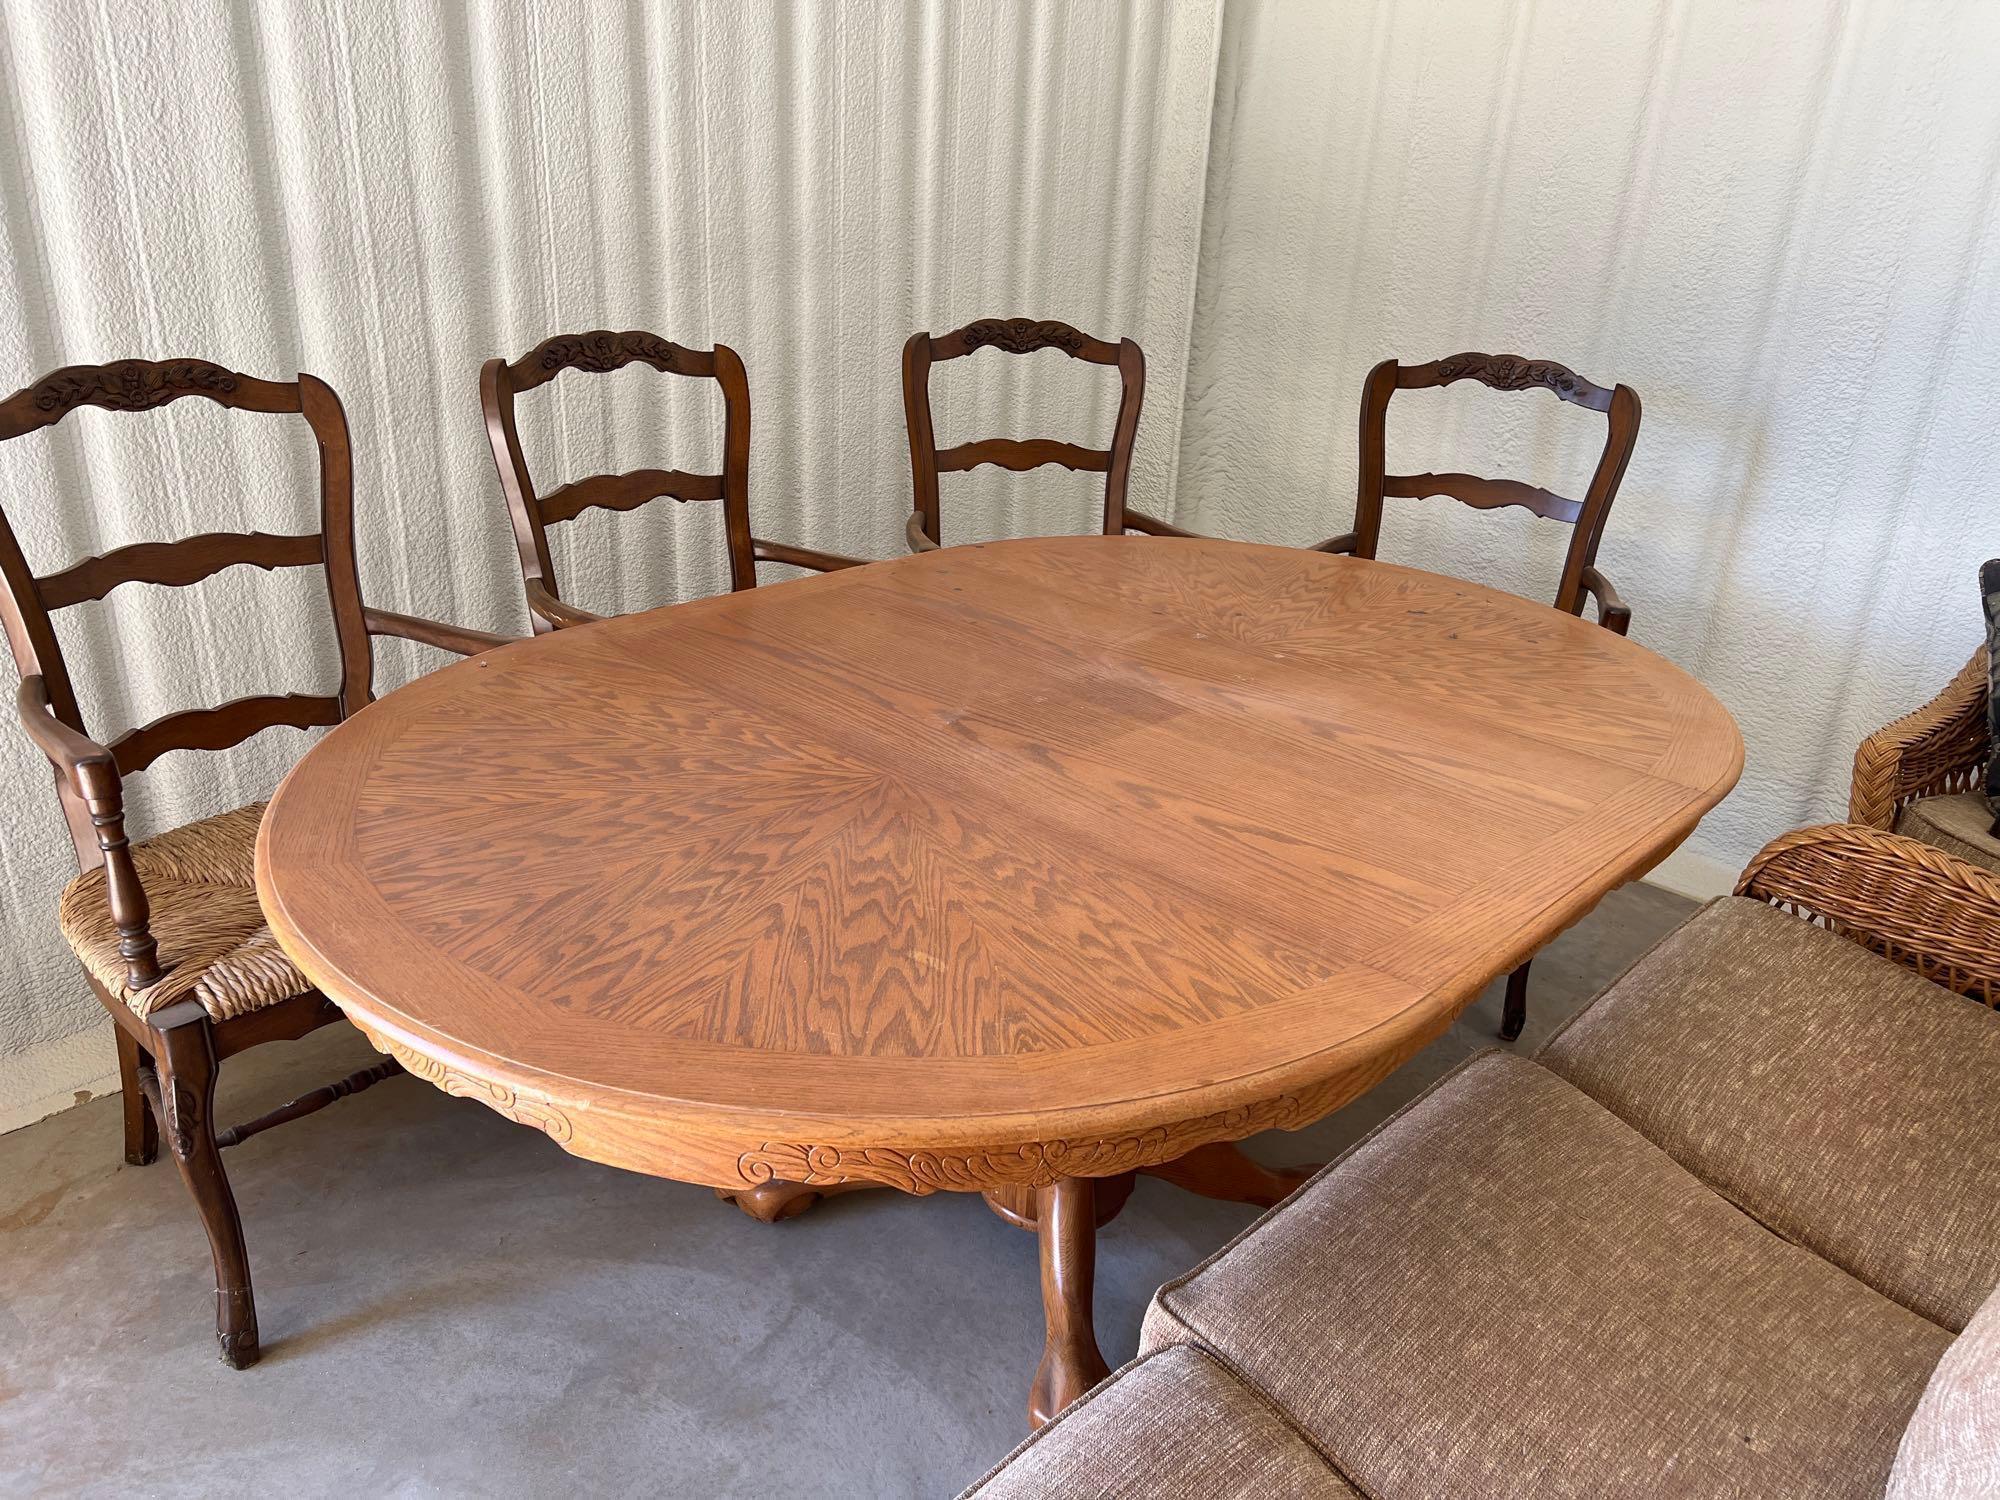 MISC FURNITURE TABLES AND CHAIRS OUTDOOR TABLE WITH 2 CHAIRS, MISSING TOP OF TABLE WICKER SET WITH 3